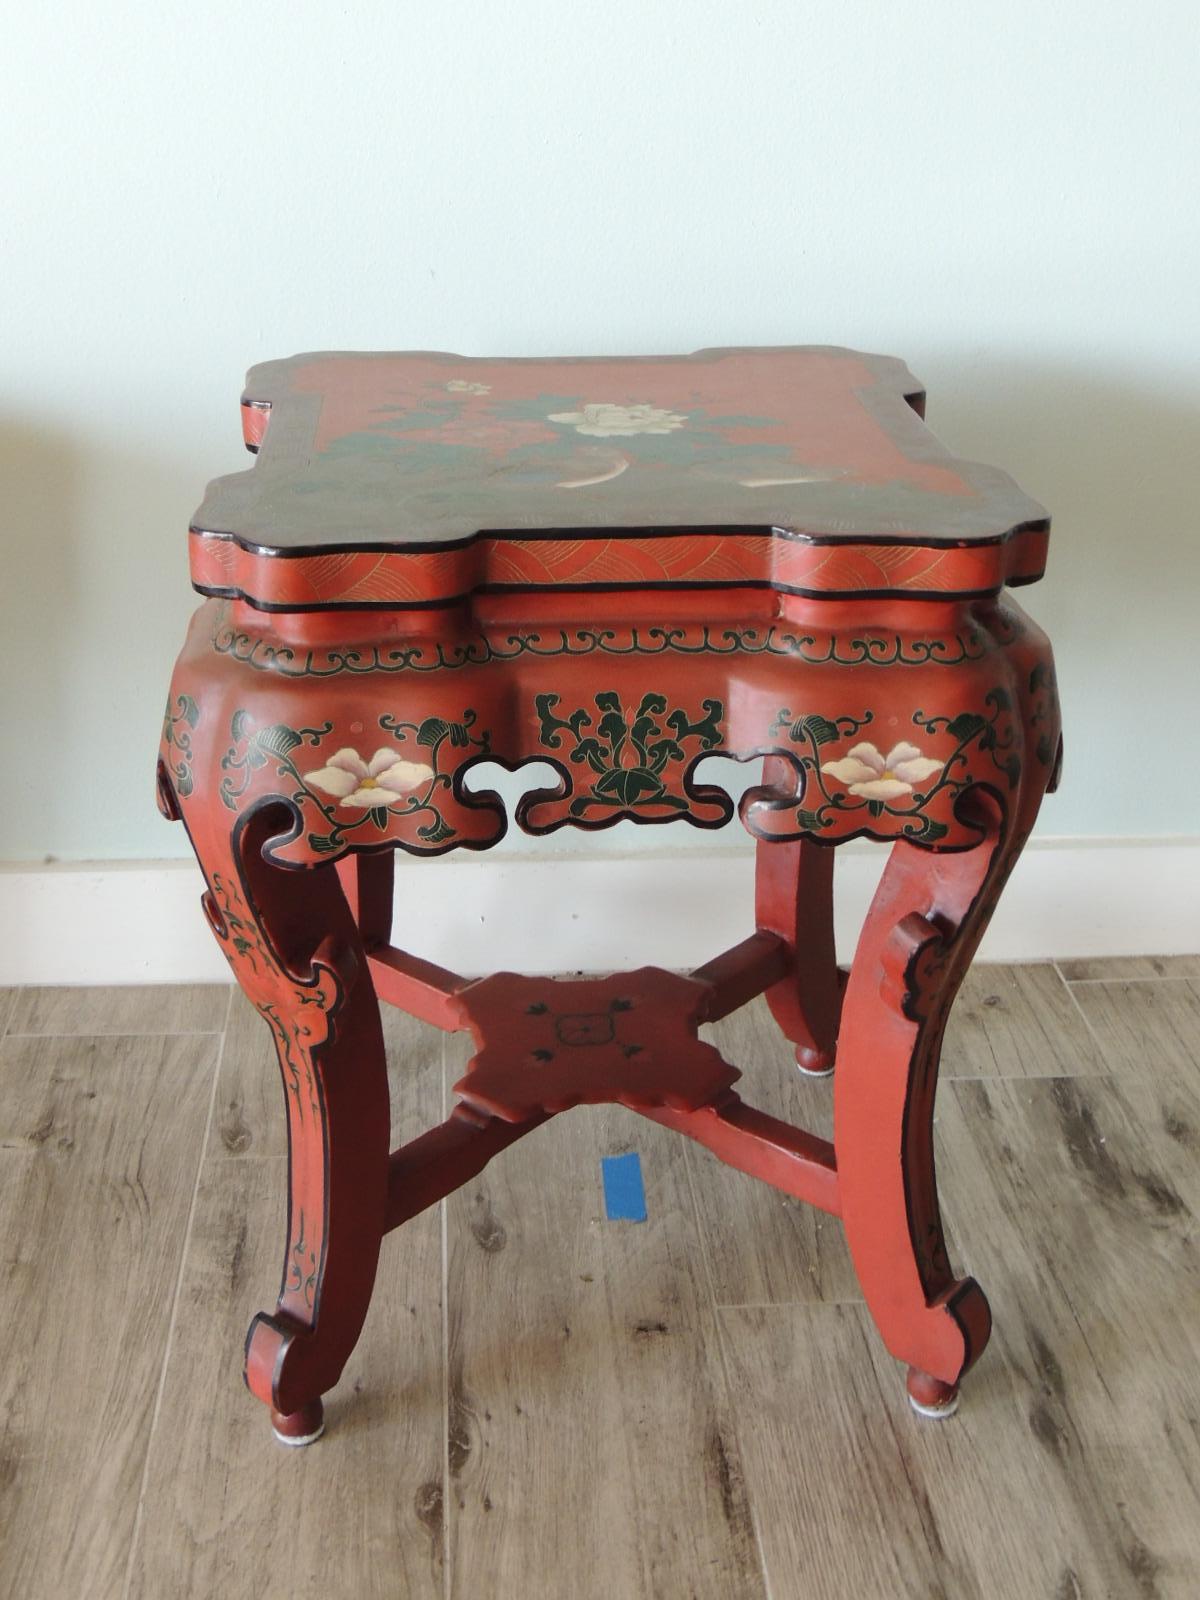 Red Chinese lacquer round side table or stool.
Intricate work depicting flowers and birds.
Could function as garden stool, side table, drinks table.
Size: 19